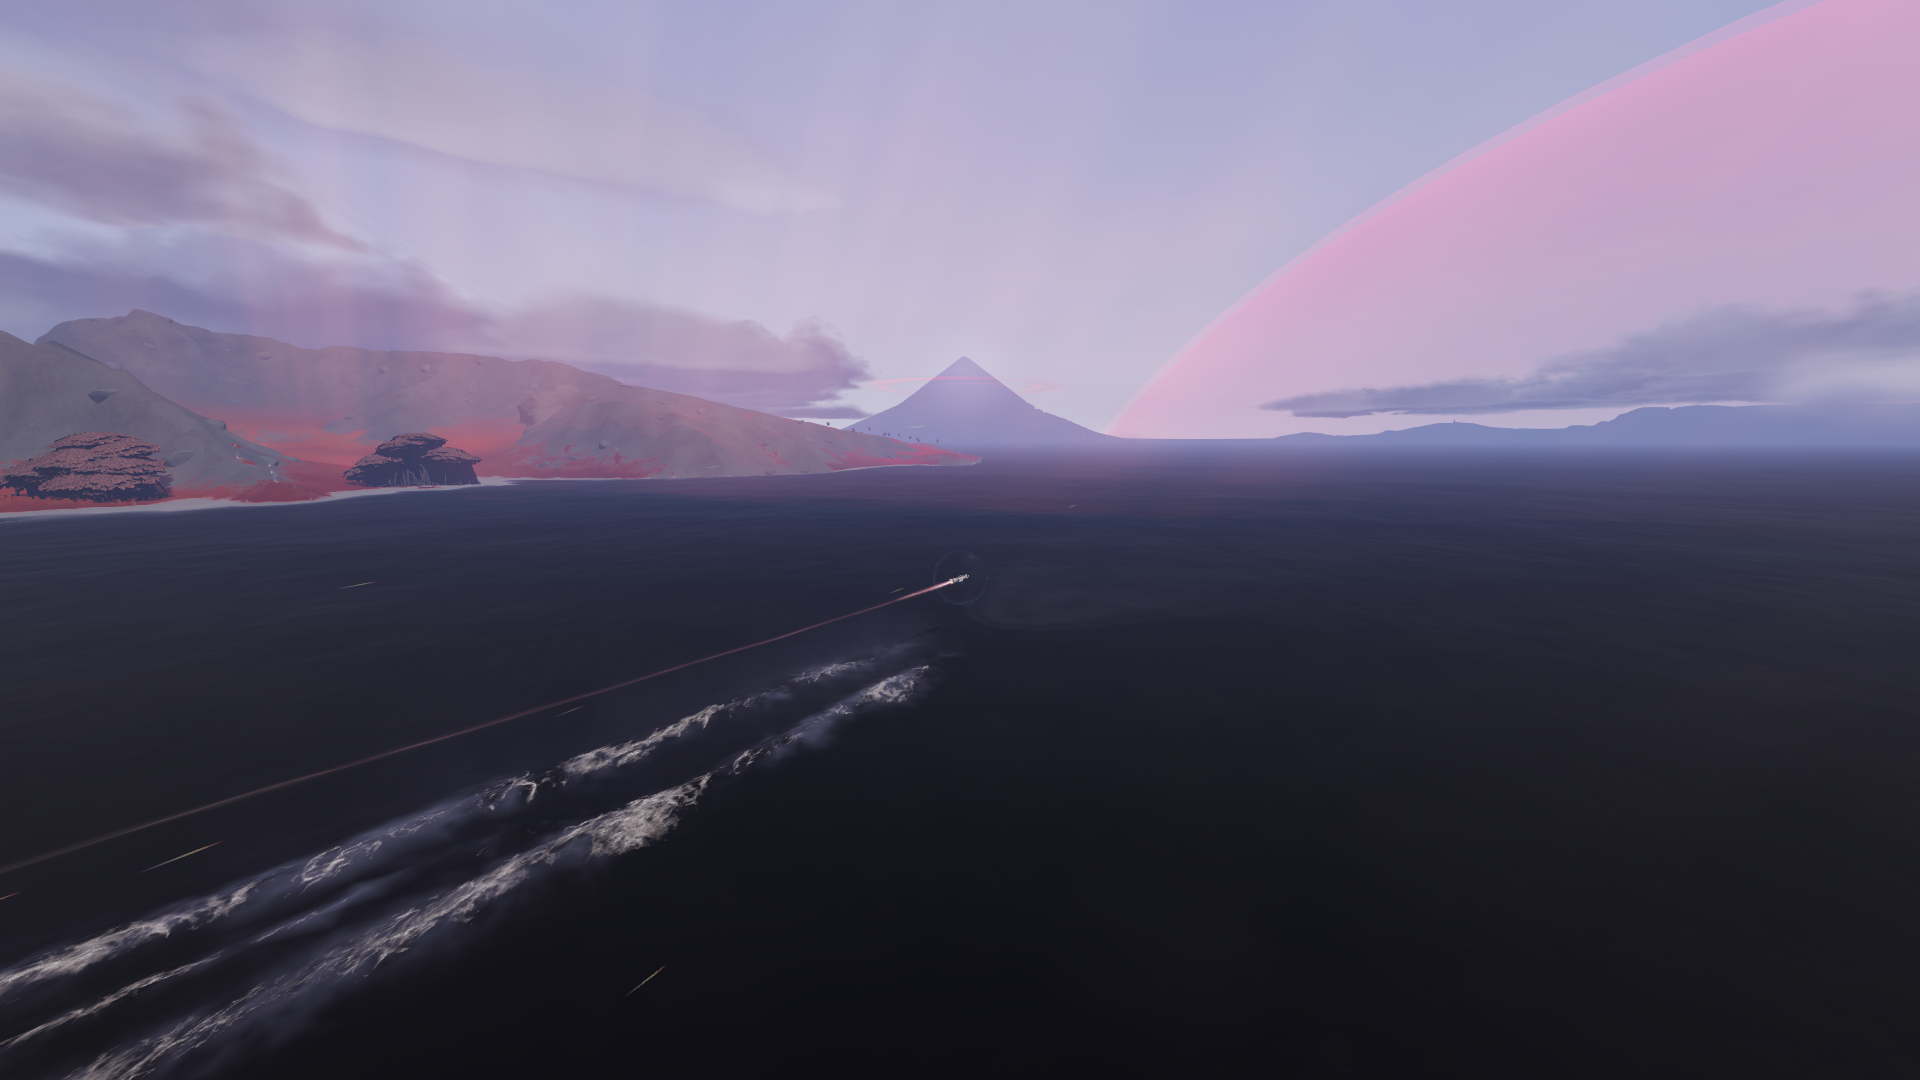 A screenshot of the jett flying over the ocean with an island to the left and the pink gloaming orb to the right